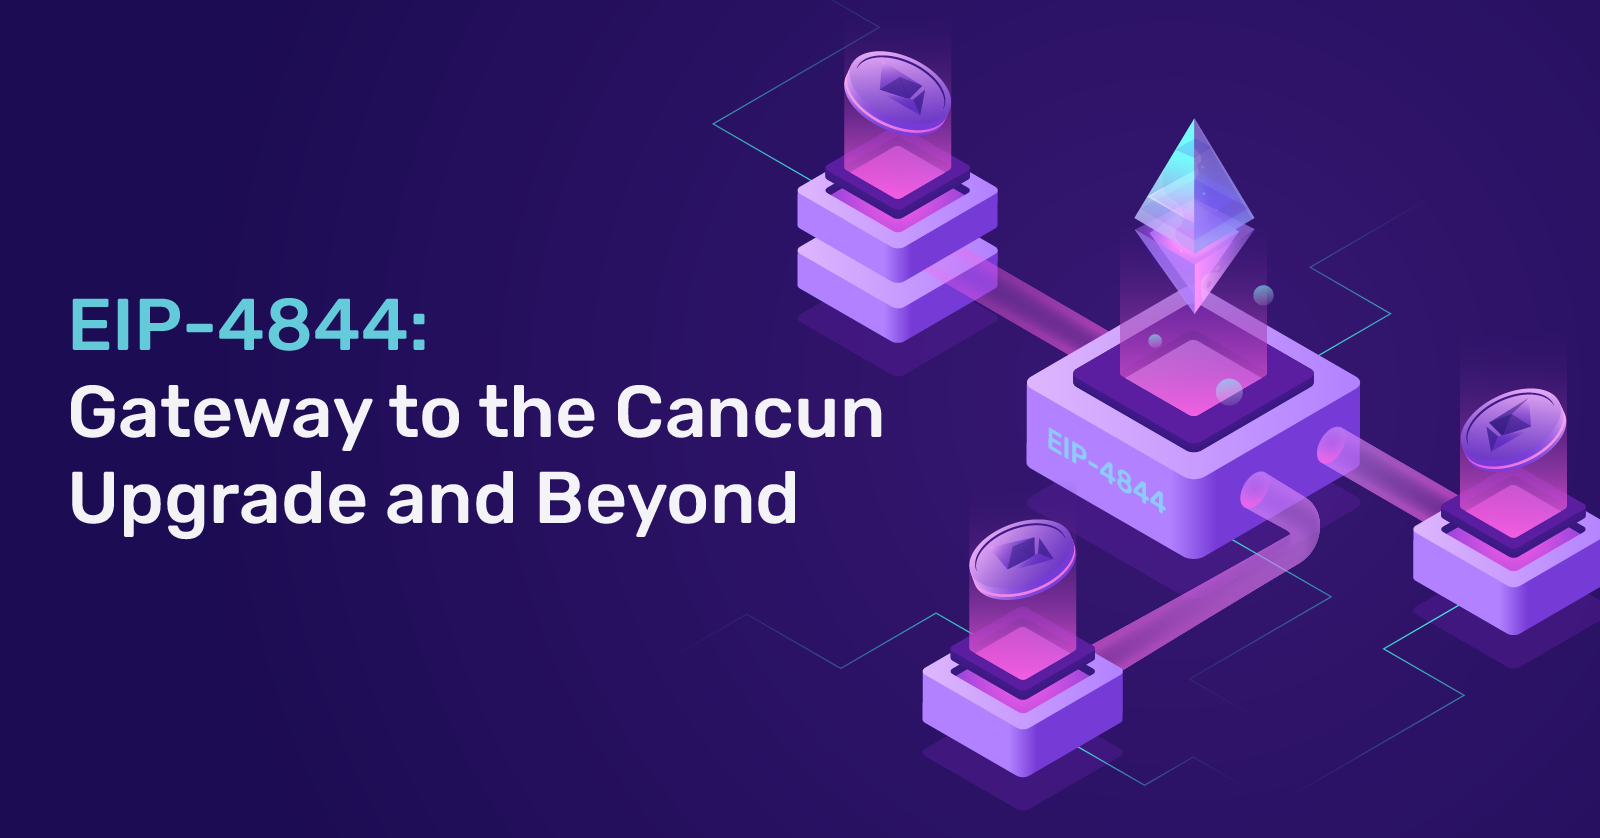 EIP-4844: A Gateway to the Cancun Upgrade and Beyond